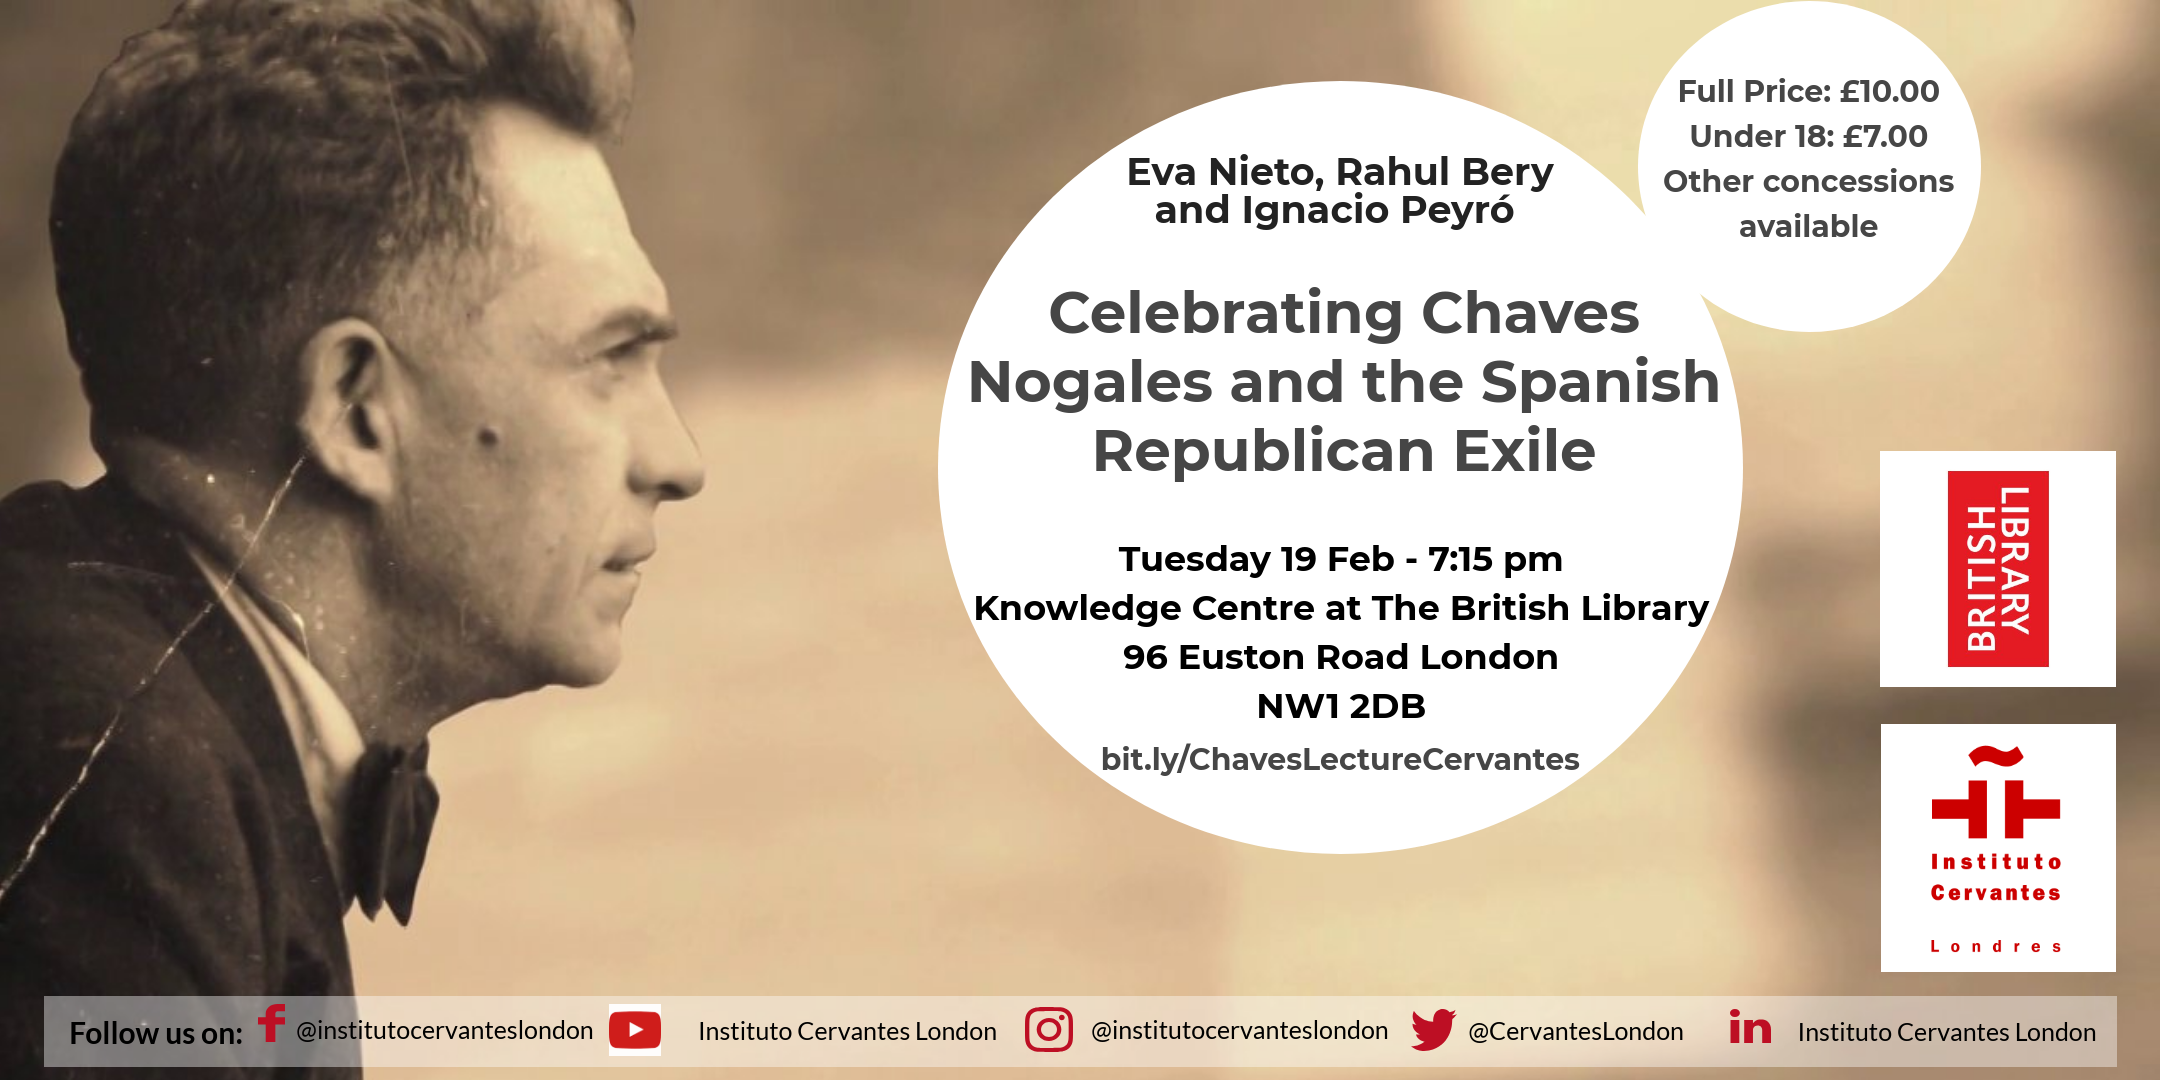 Chaves Nogales: Spanish exiles in London